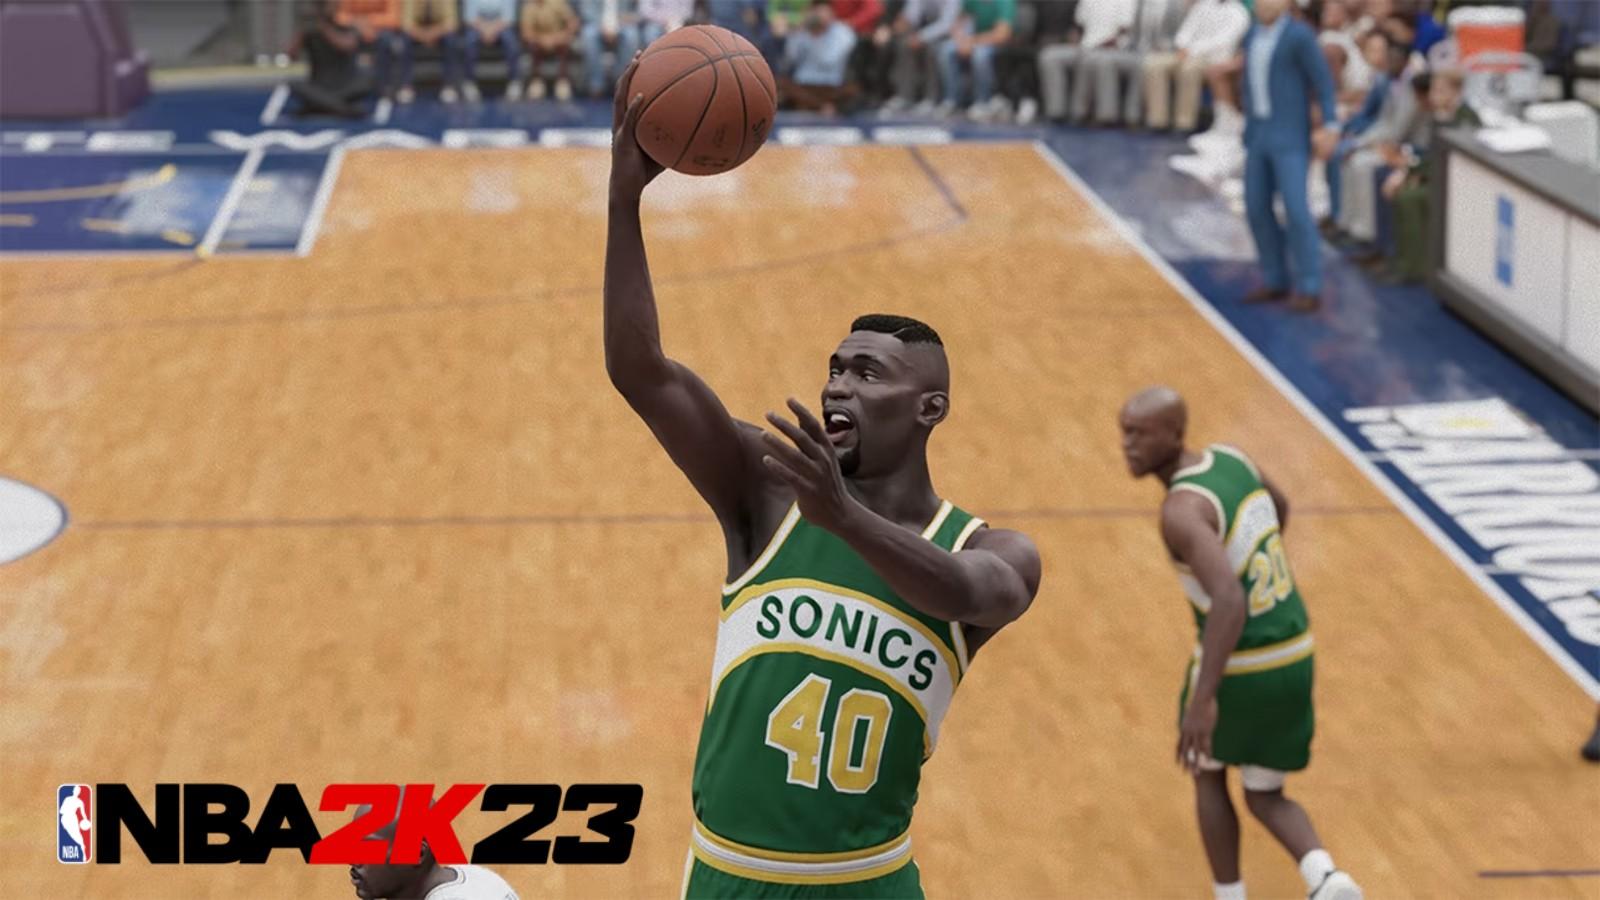 New NBA City Jerseys Added to NBA 2K23 NEXT GEN!!! and City Courts